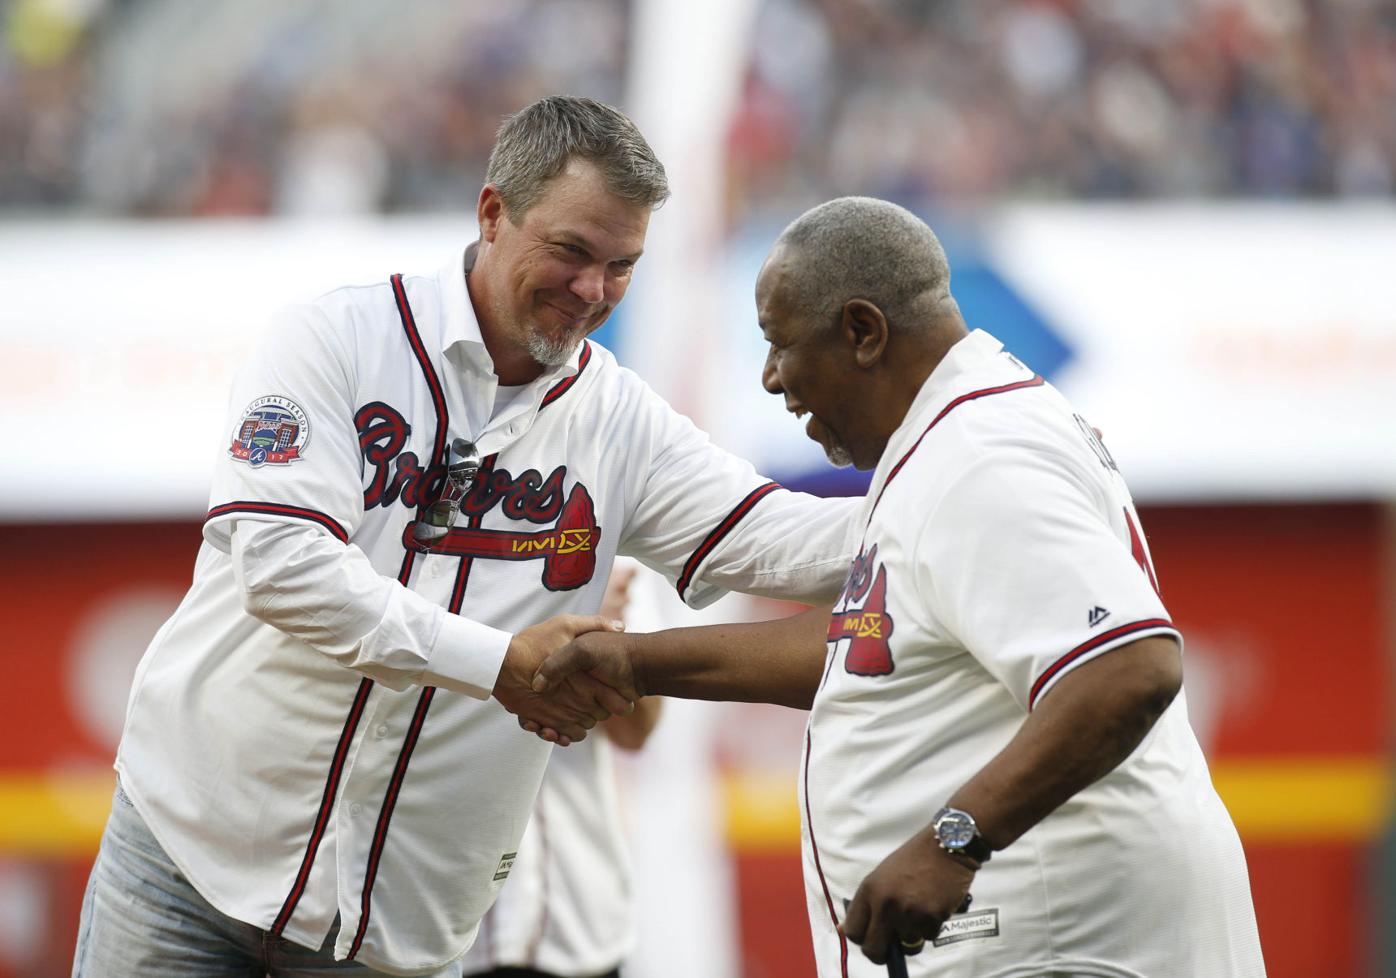 Chipper Jones to join Thome, Guerrero, & Hoffman in baseball Hall of Fame